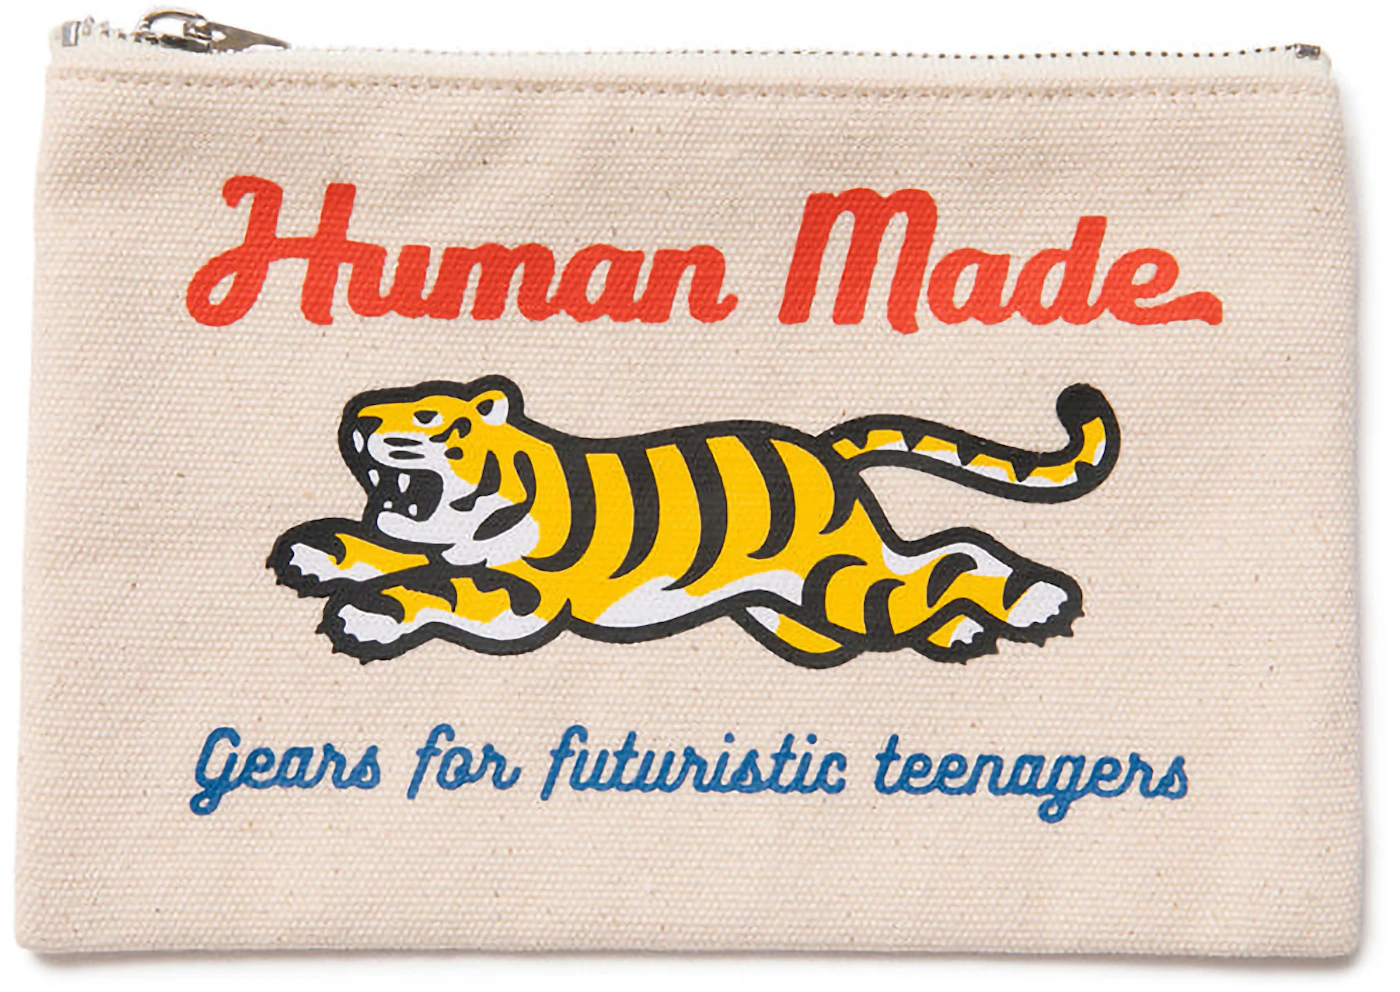 Human Made Tiger Bank Pouch White - FW22 - US